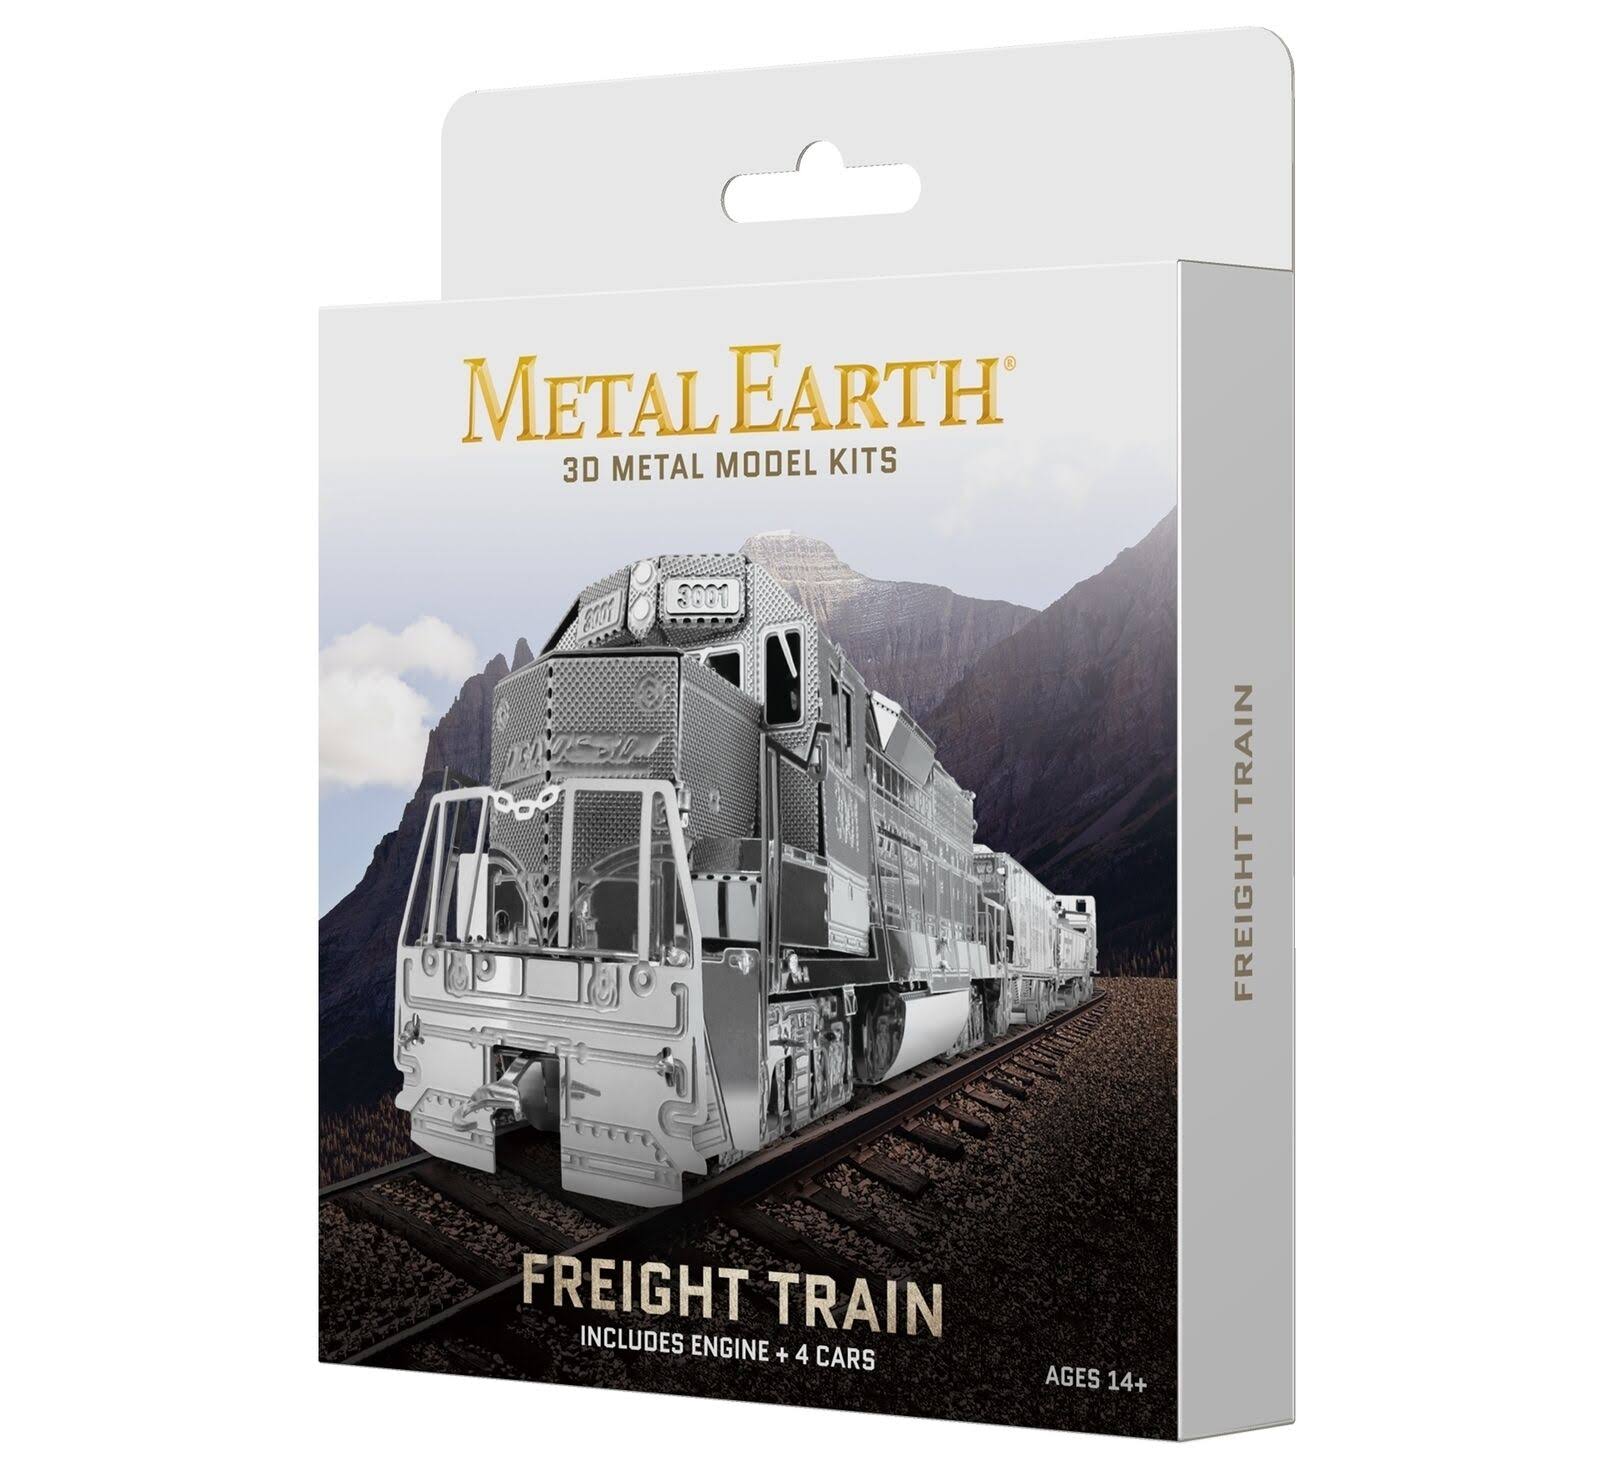 Fascinations Metal Earth Gift Box Set - Freight Train